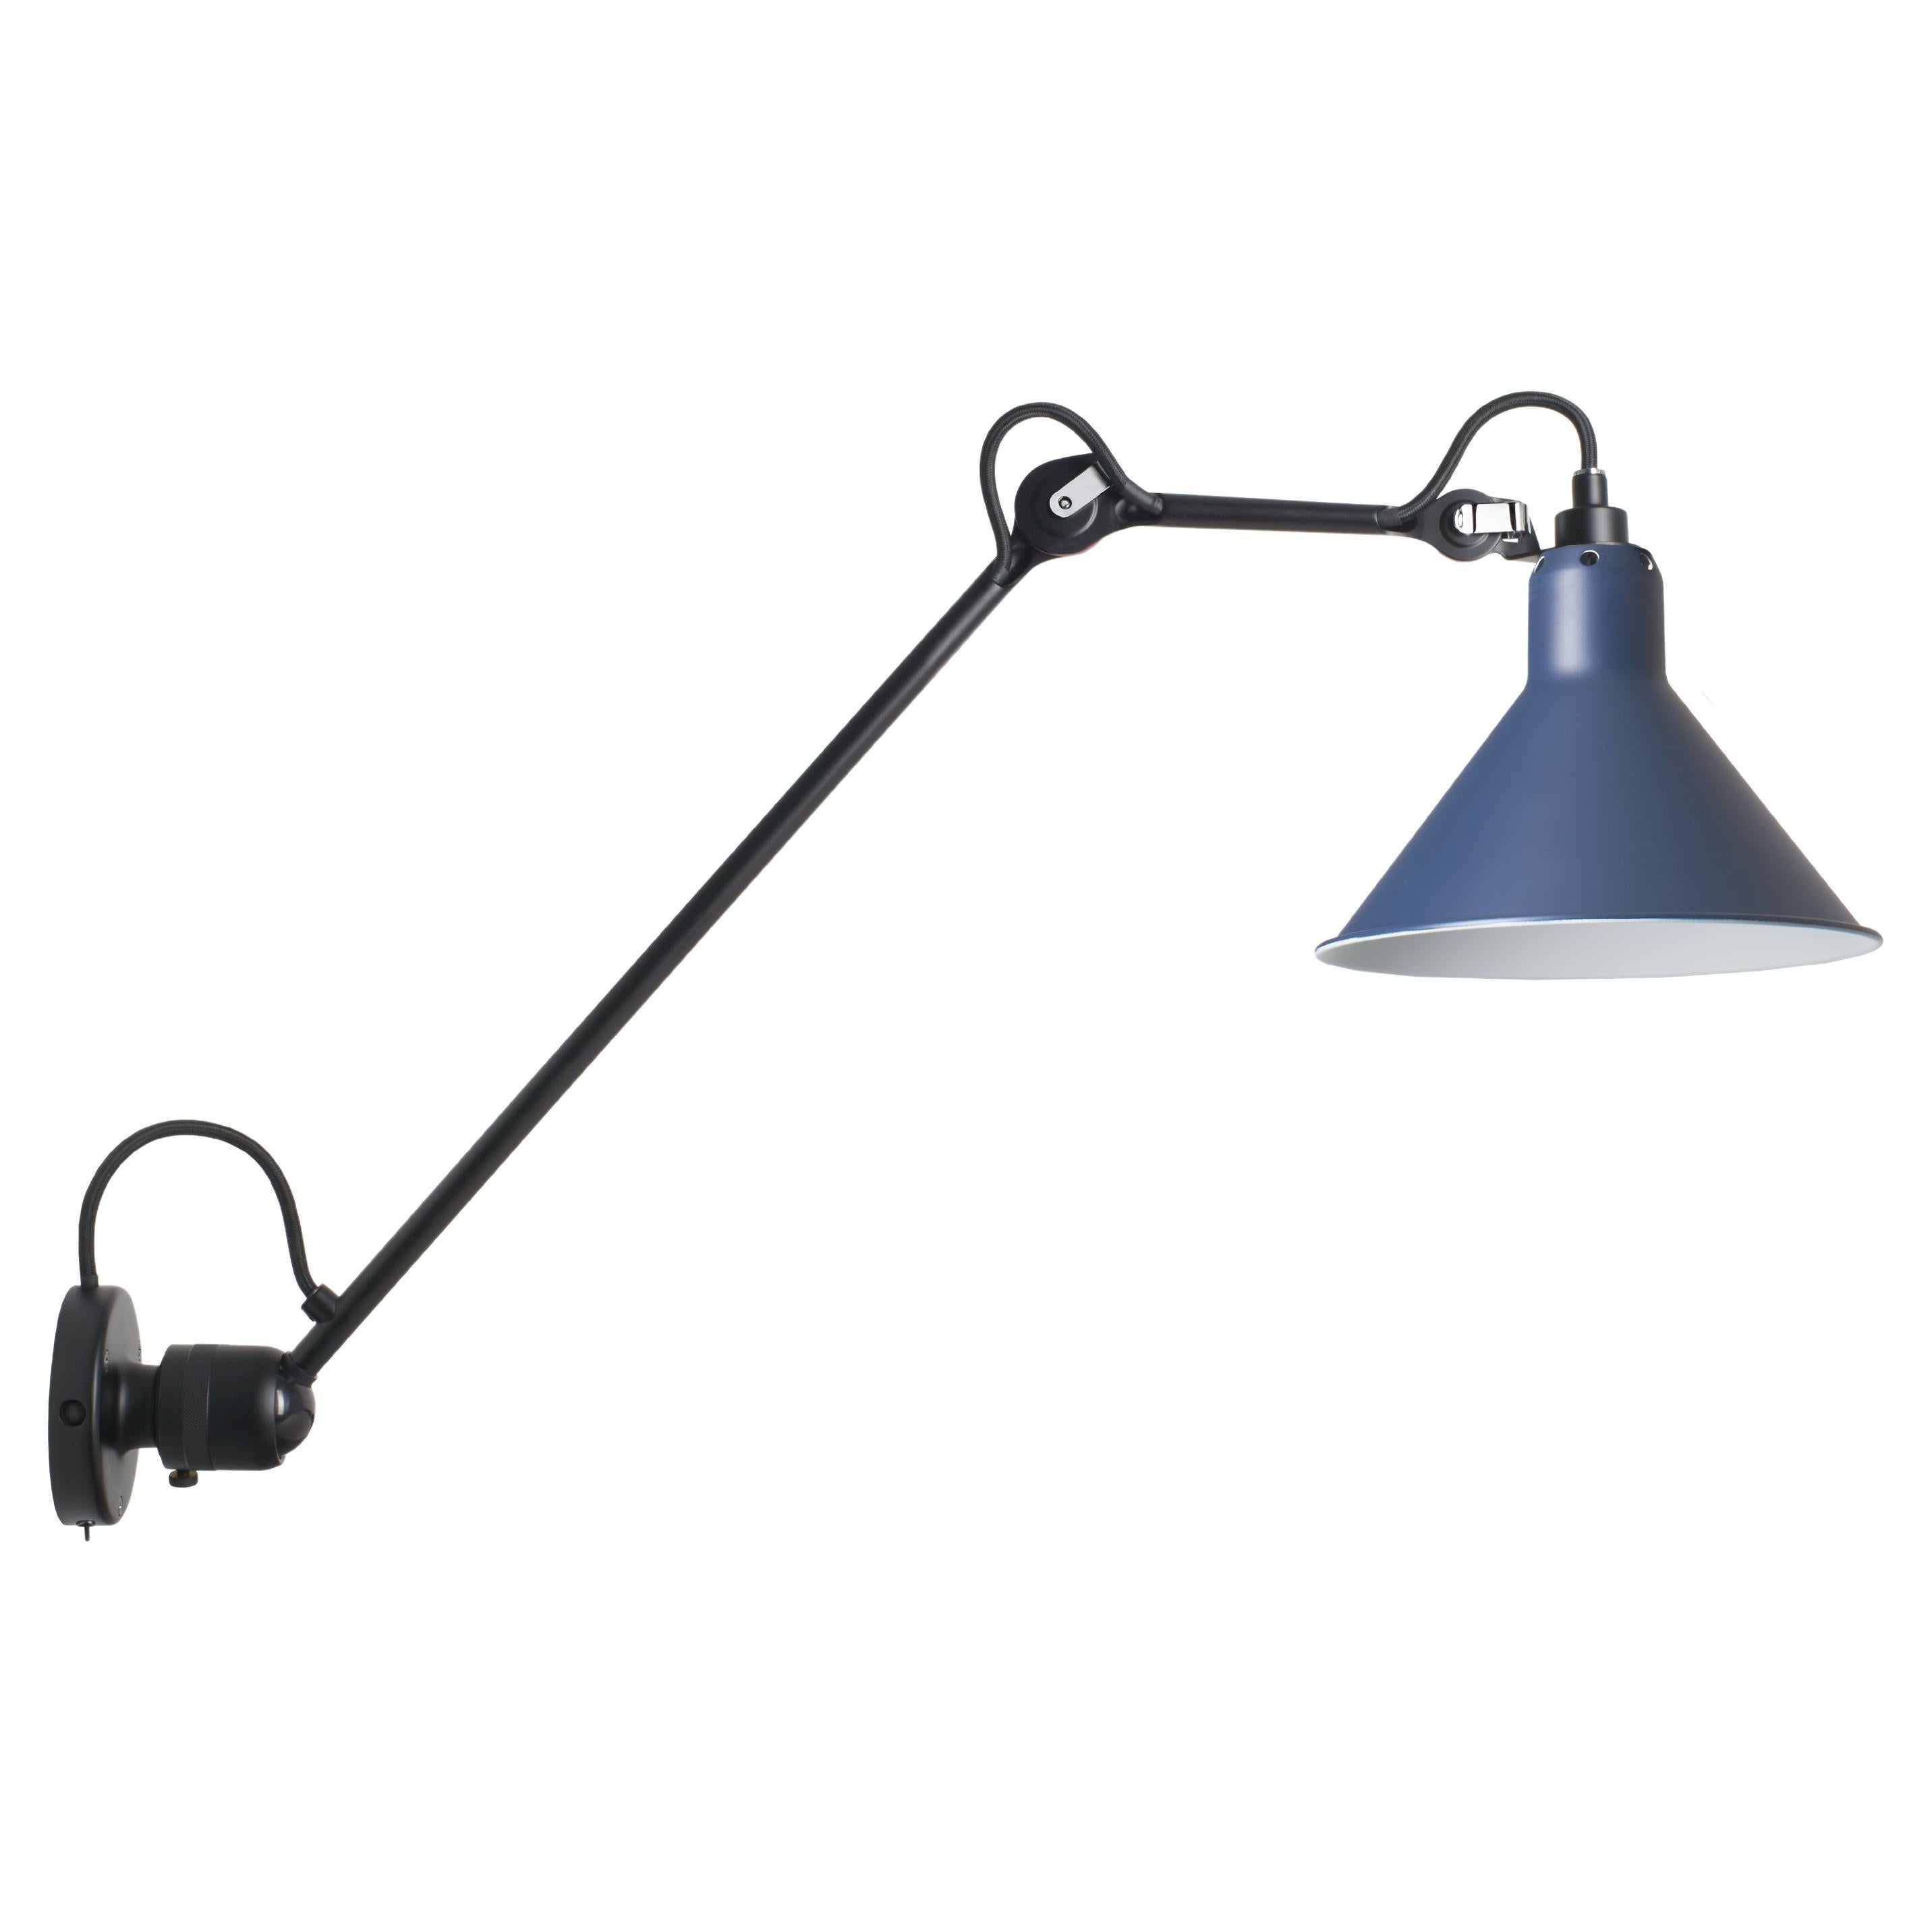 DCW Editions La Lampe Gras N°304 L40 SW Conic Wall Lamp in Blue Shade